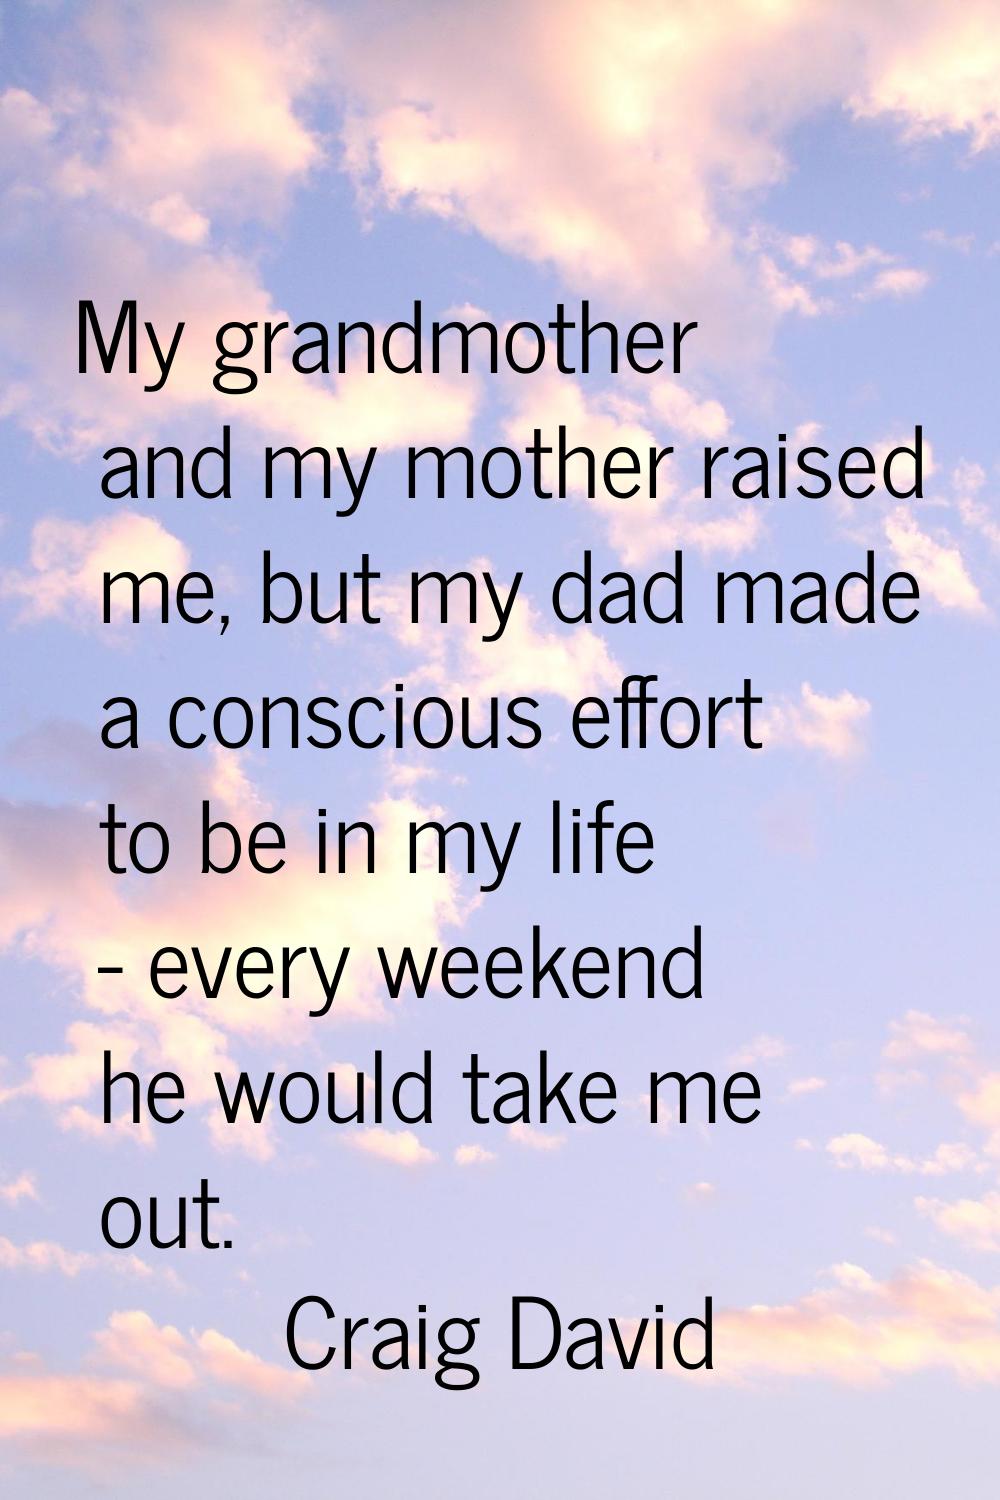 My grandmother and my mother raised me, but my dad made a conscious effort to be in my life - every